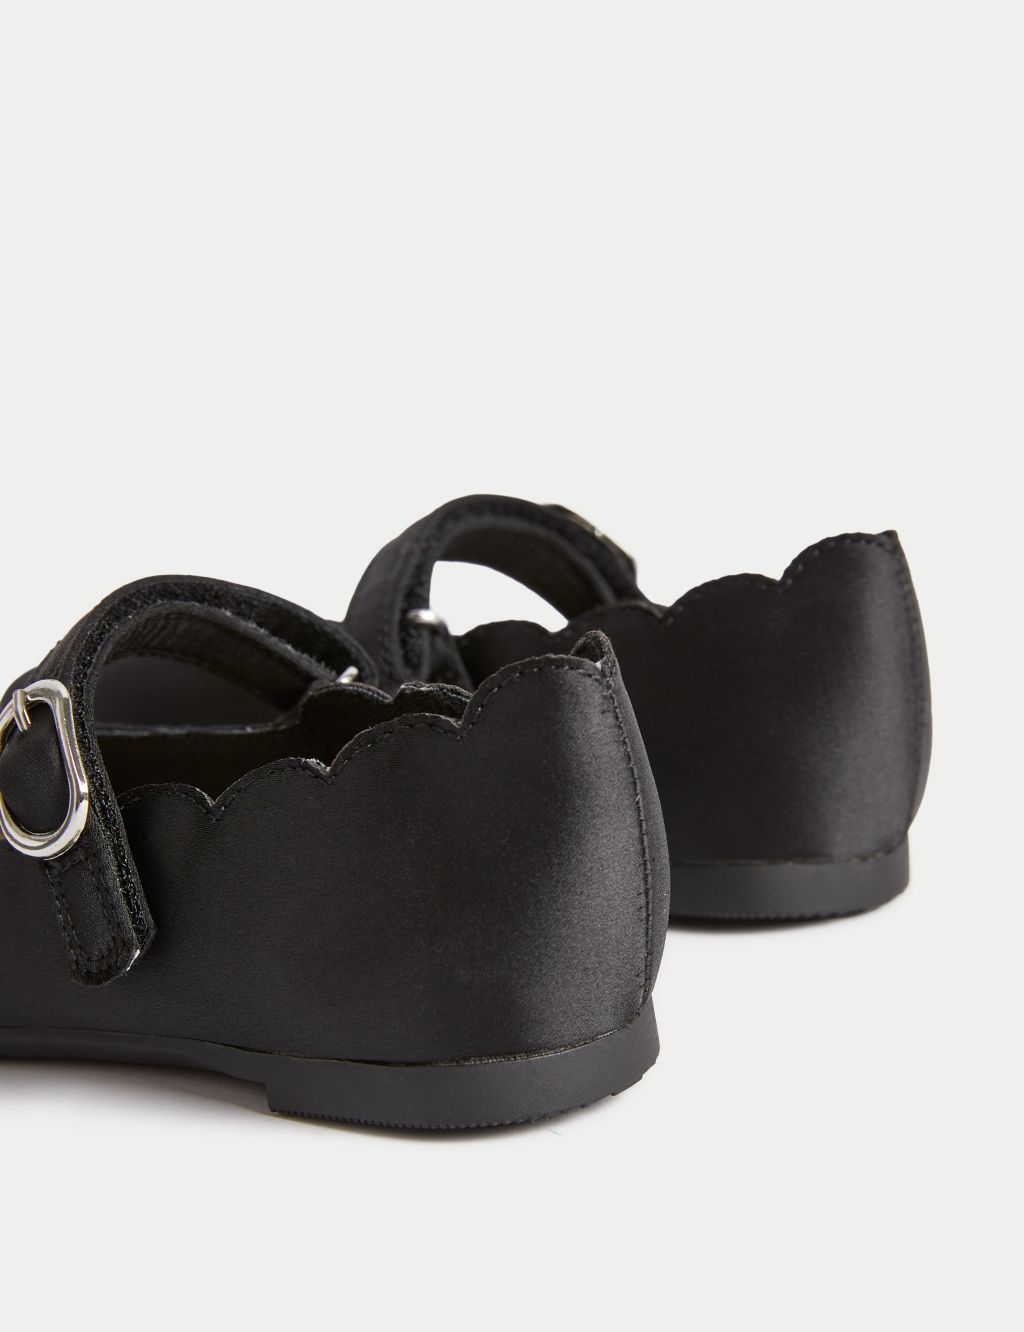 Kids' Satin Mary Jane Shoes (4 Small - 13 Small) image 3